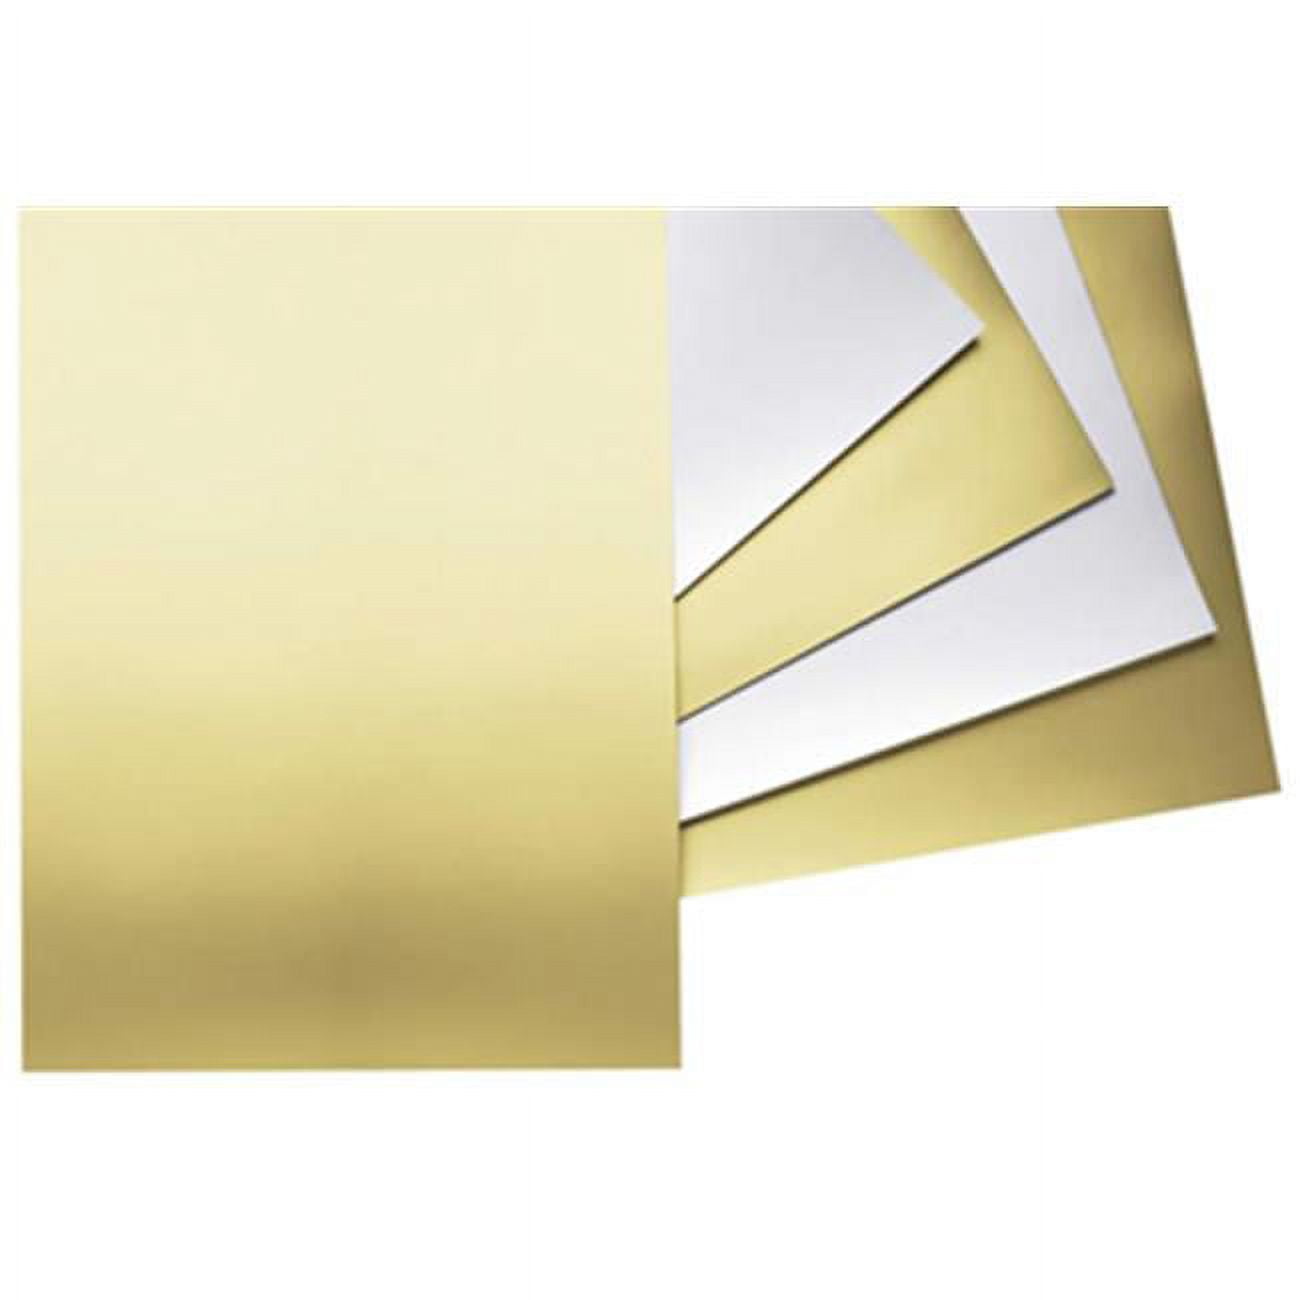 You apply gold foil to a piece of red poster board to make the